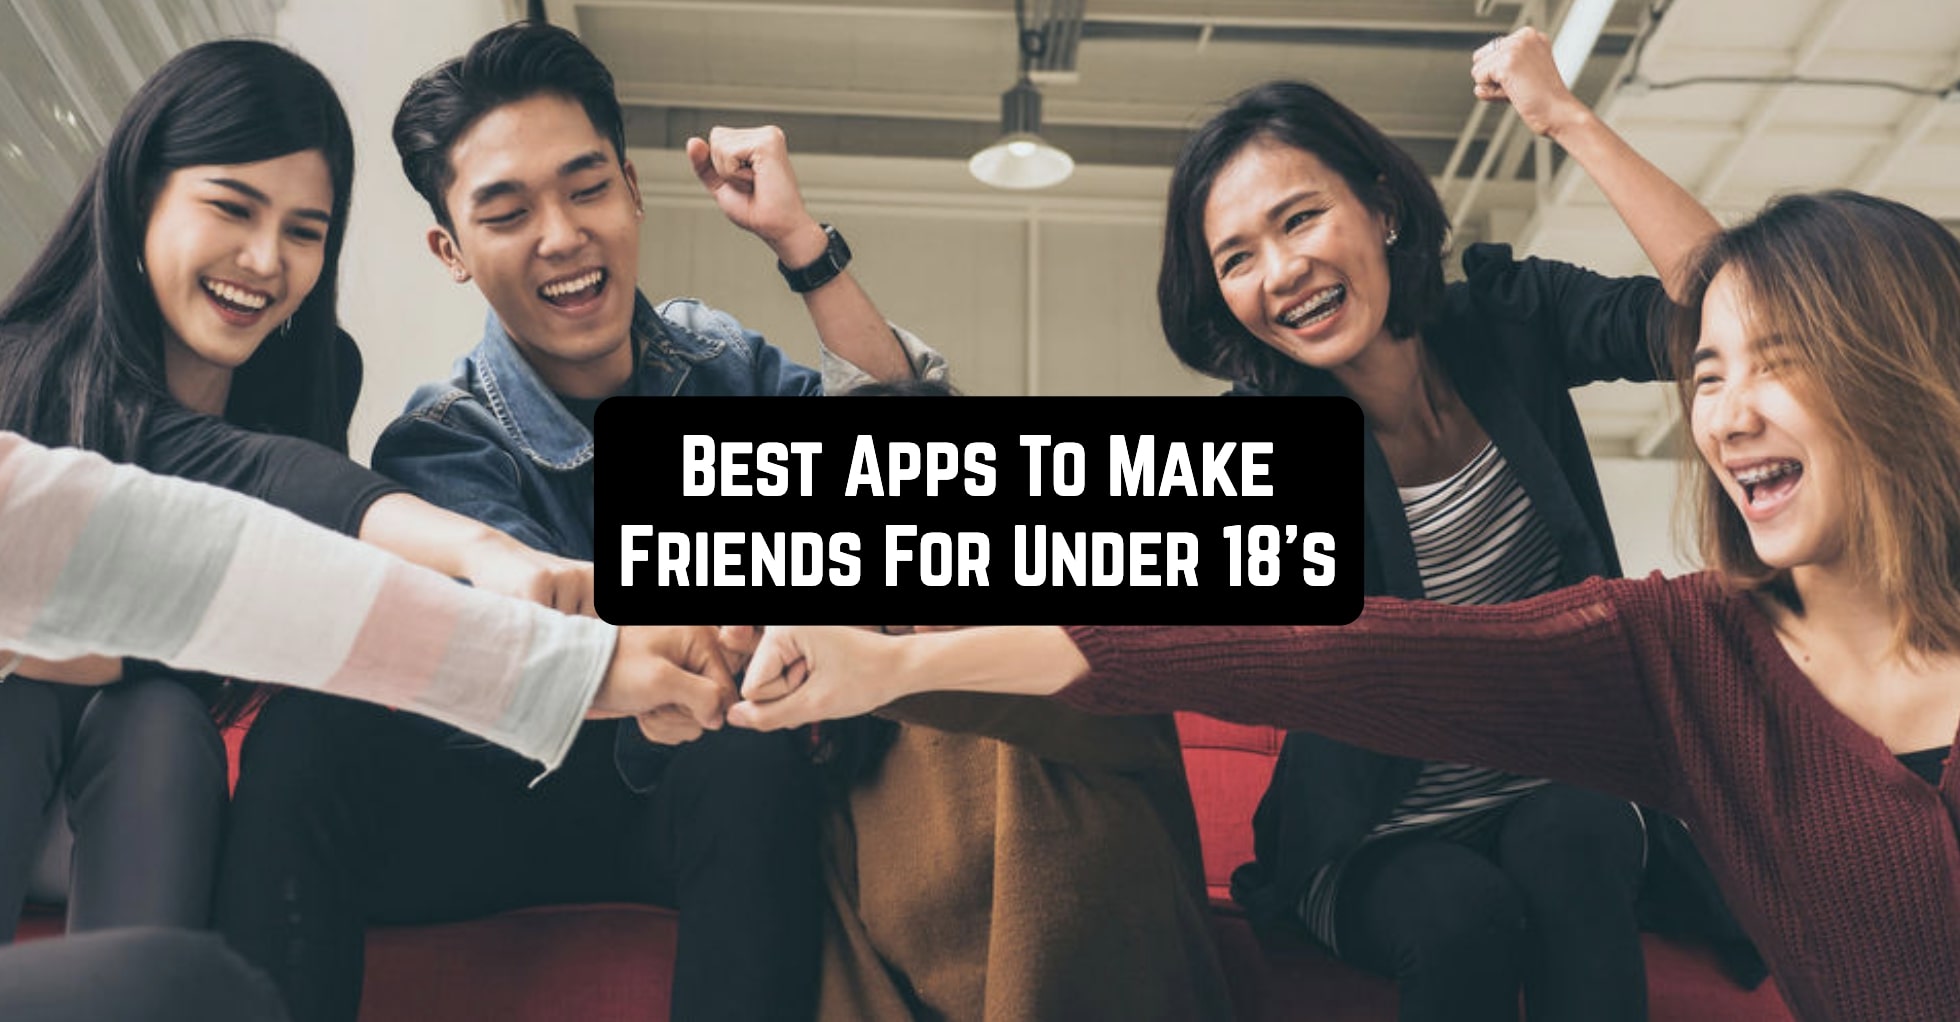 Best Apps To Make Friends For Under 18's